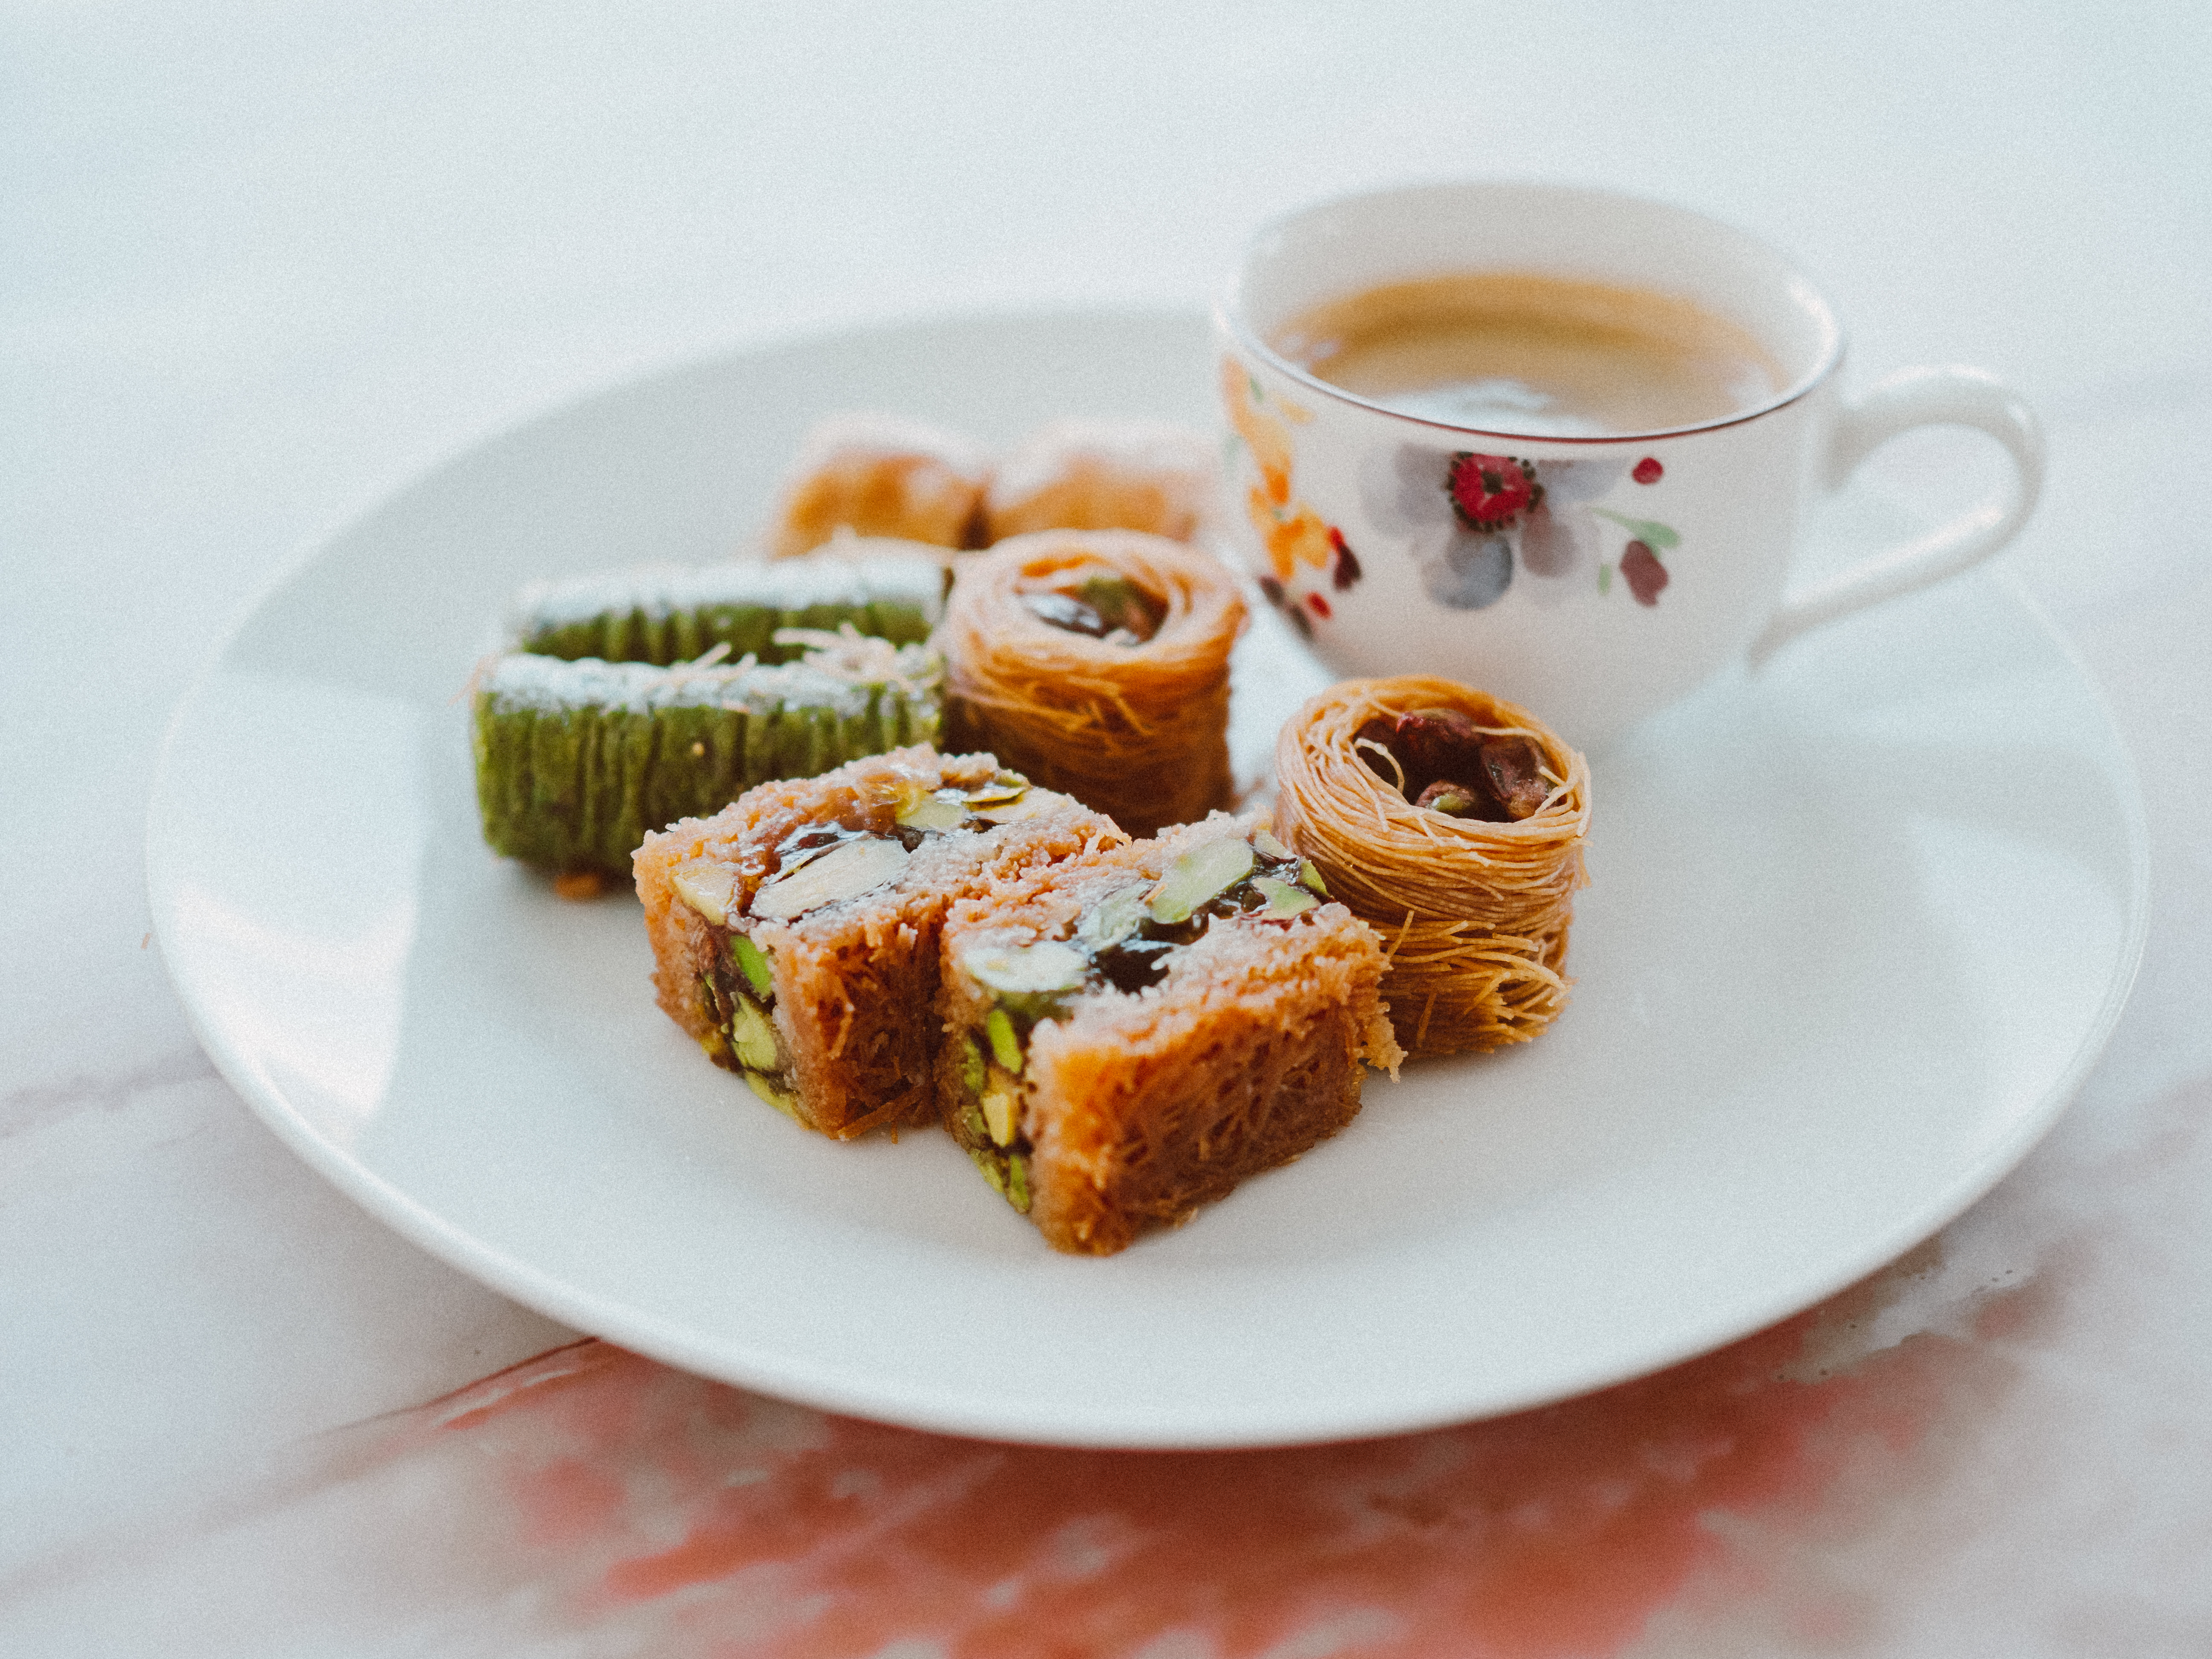 Photo of a plate with baklava and a cup of coffee